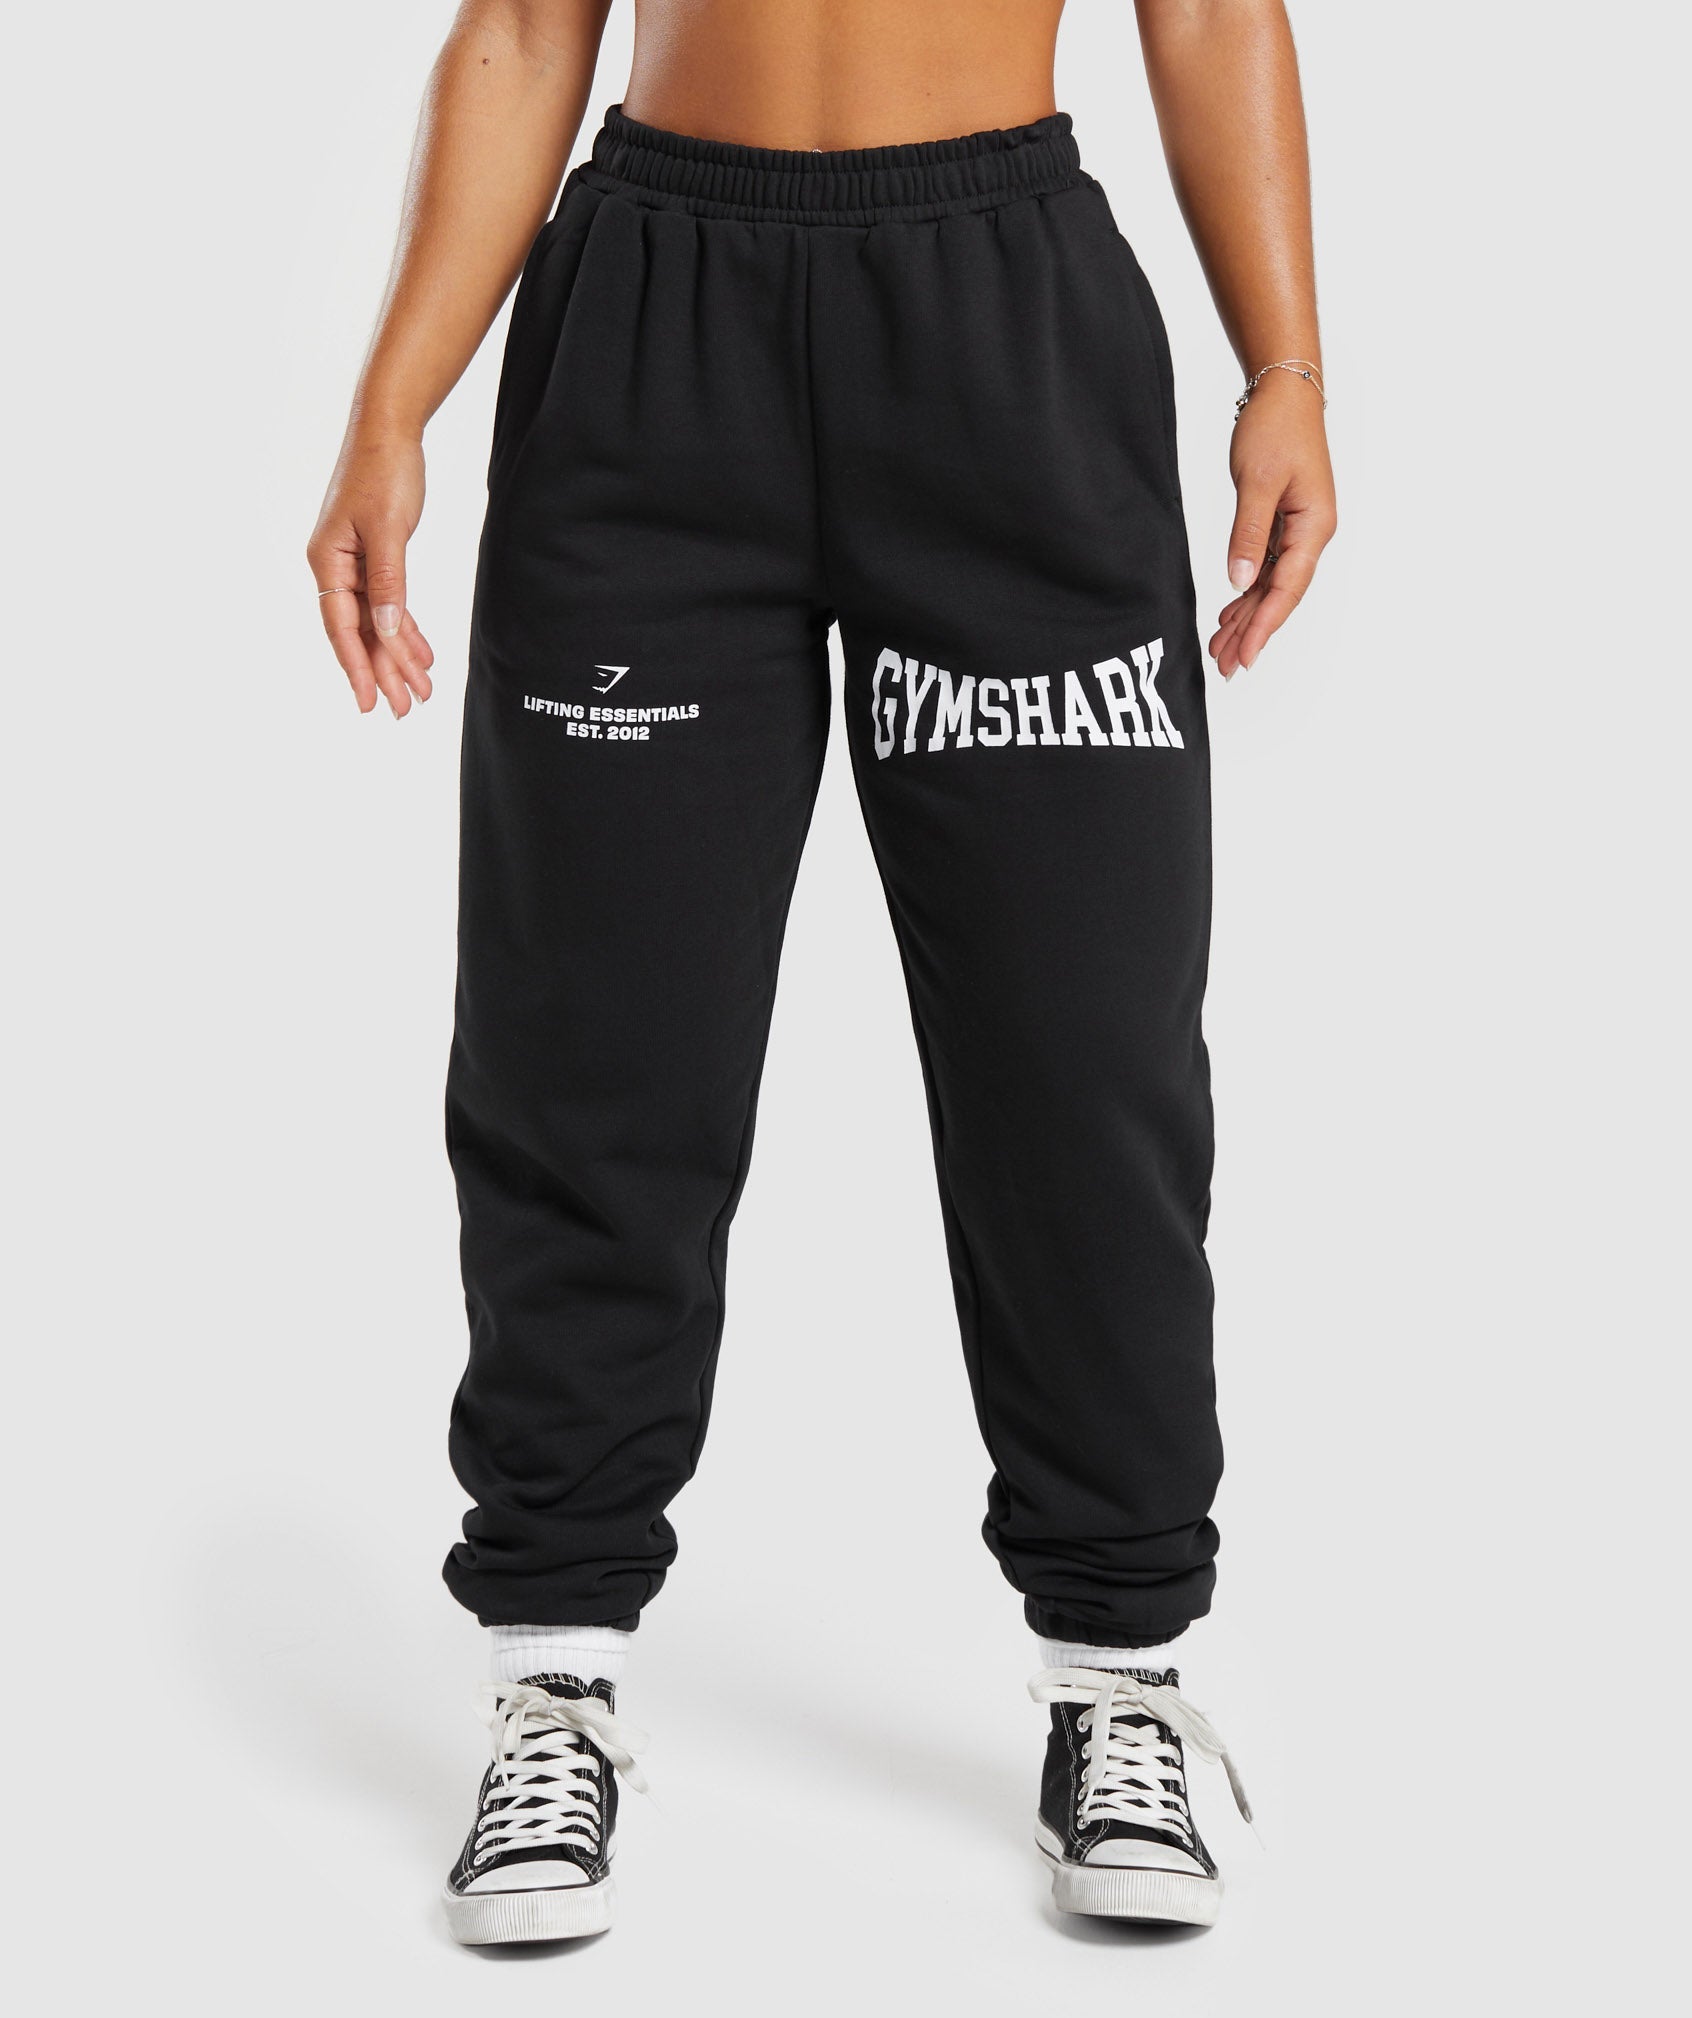 Lifting Essentials Graphic Joggers in Black - view 1